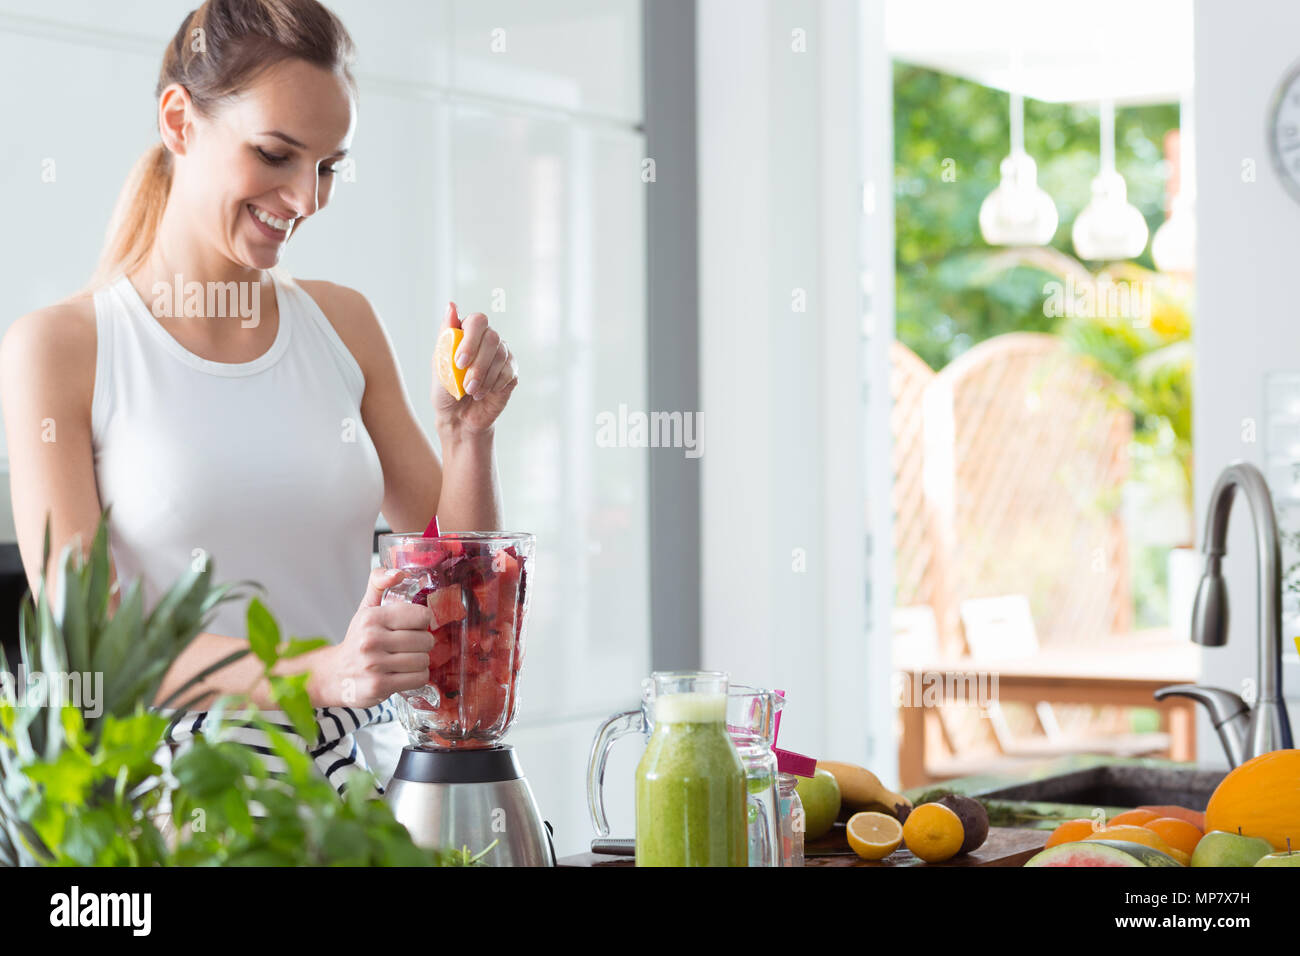 Smiling woman squeezing orange juice into blender with sliced watermelon and beet while preparing smoothie in kitchen Stock Photo